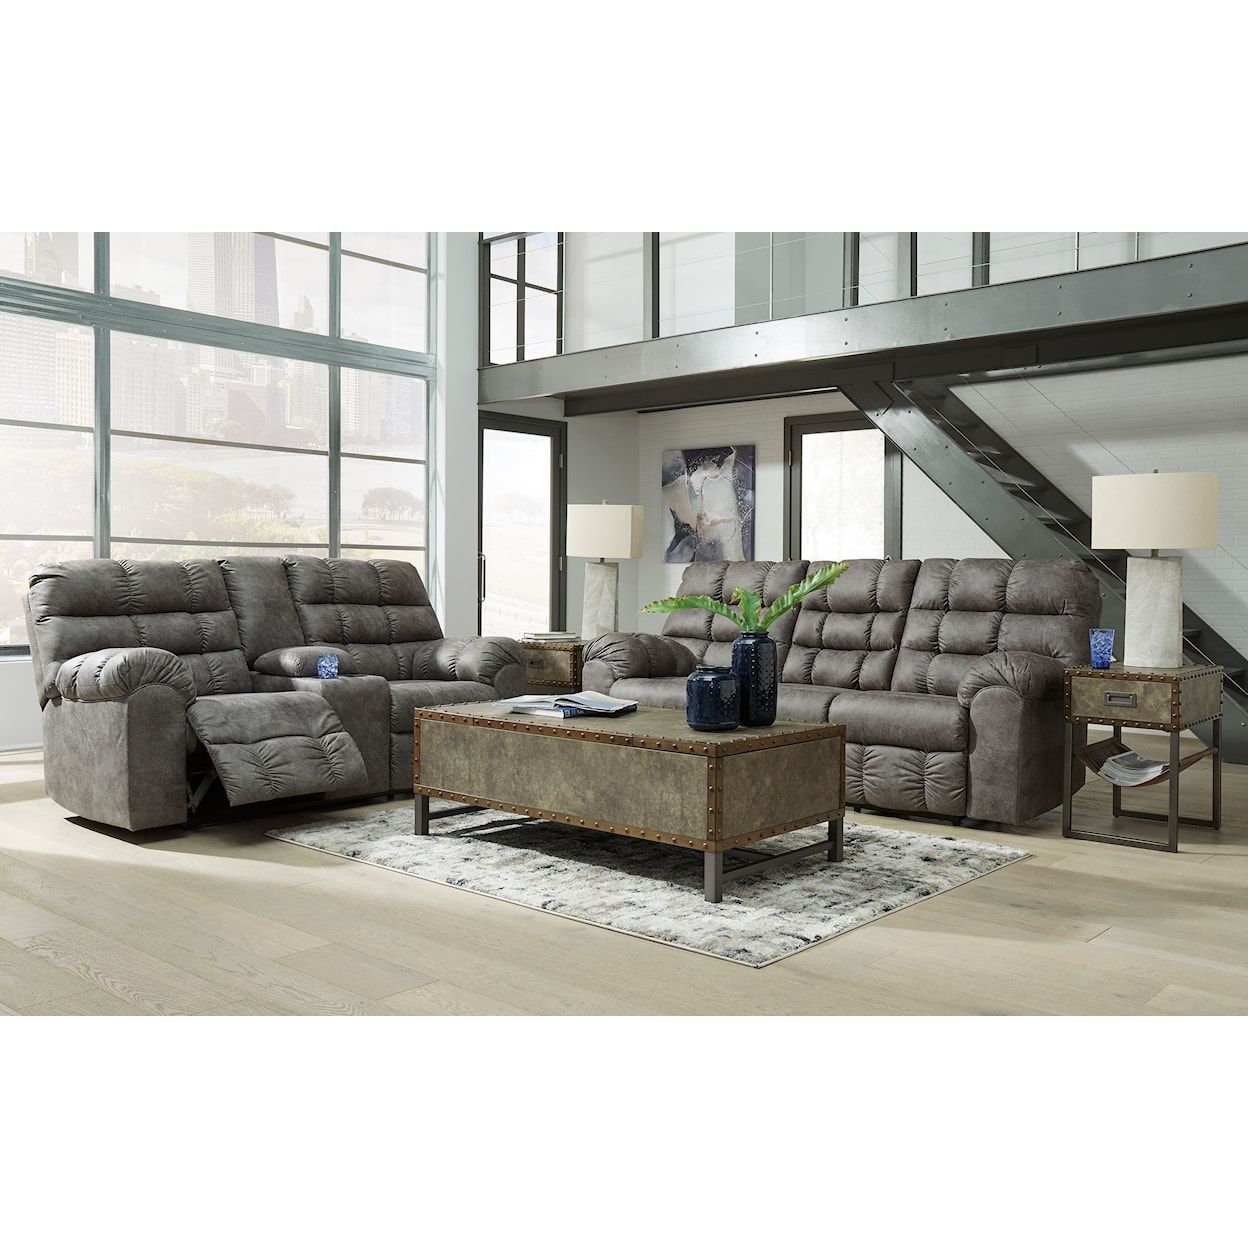 StyleLine Derwin Reclining Sofa with Drop Down Table